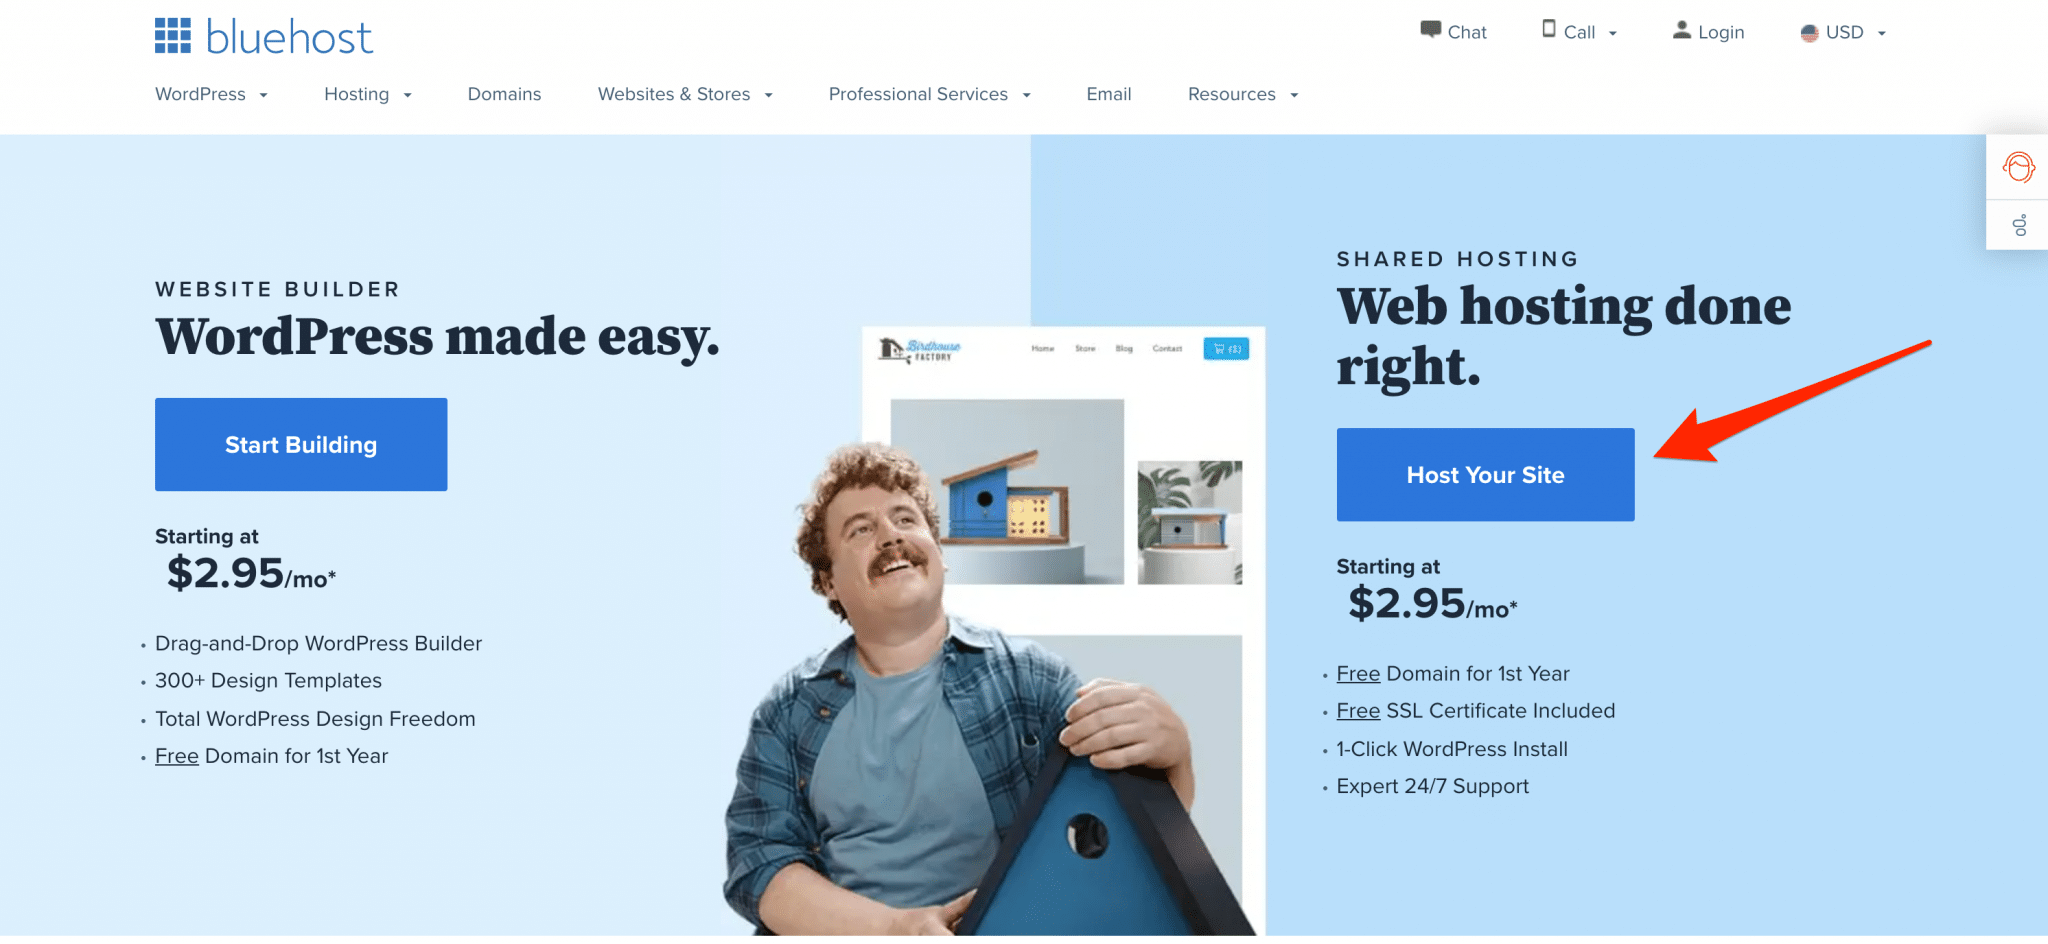 Bluehost homepage with the "Host your site" button to install WordPress in one click.